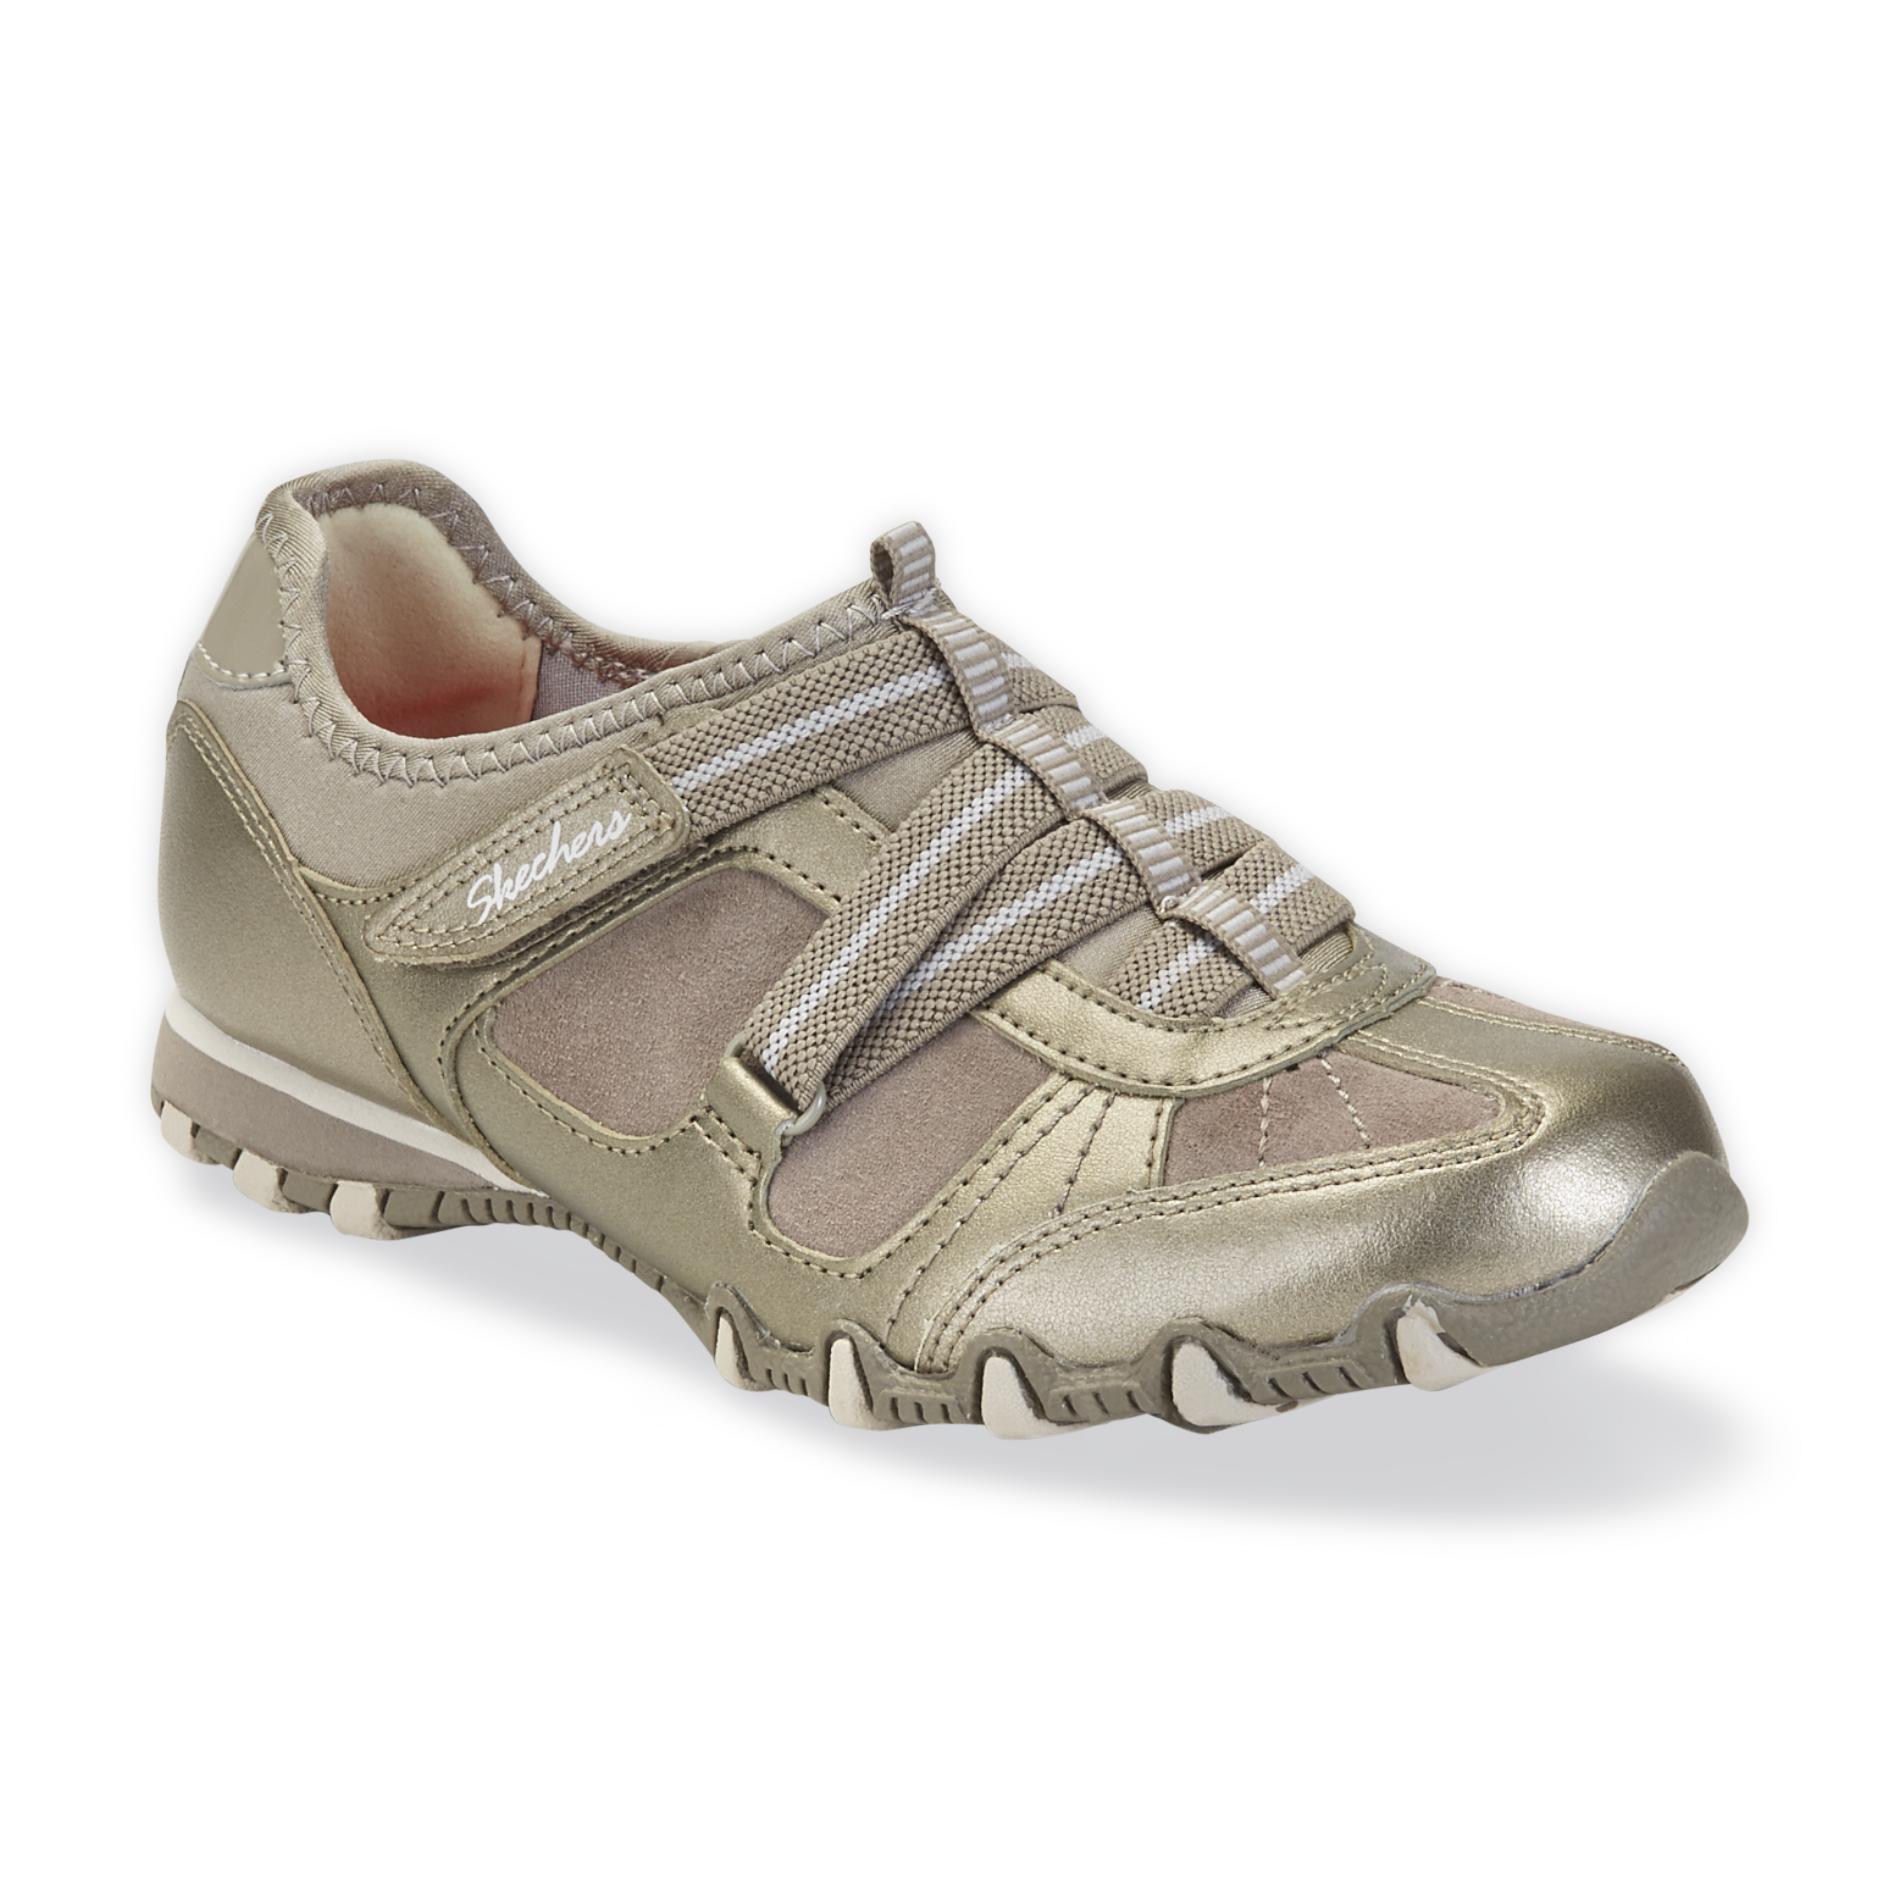 Skechers Women's Rock Steady Taupe Casual Athletic Shoe